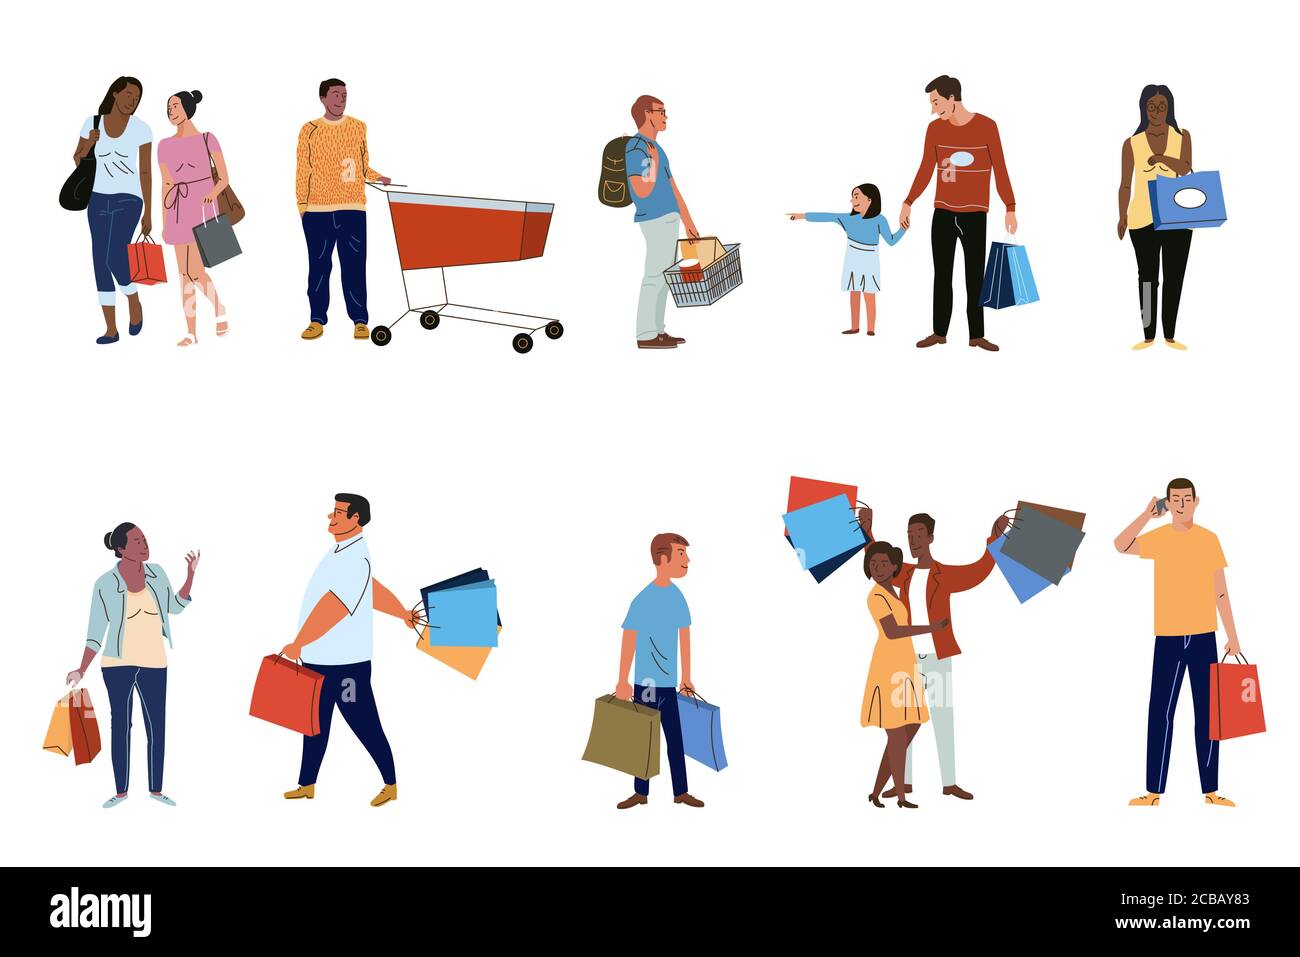 Shoppers flat vector characters set. Buyers with purchases, consumers buying products isolated cliparts pack on white background. Cartoon people holding paper shopping bags illustrations Stock Vector